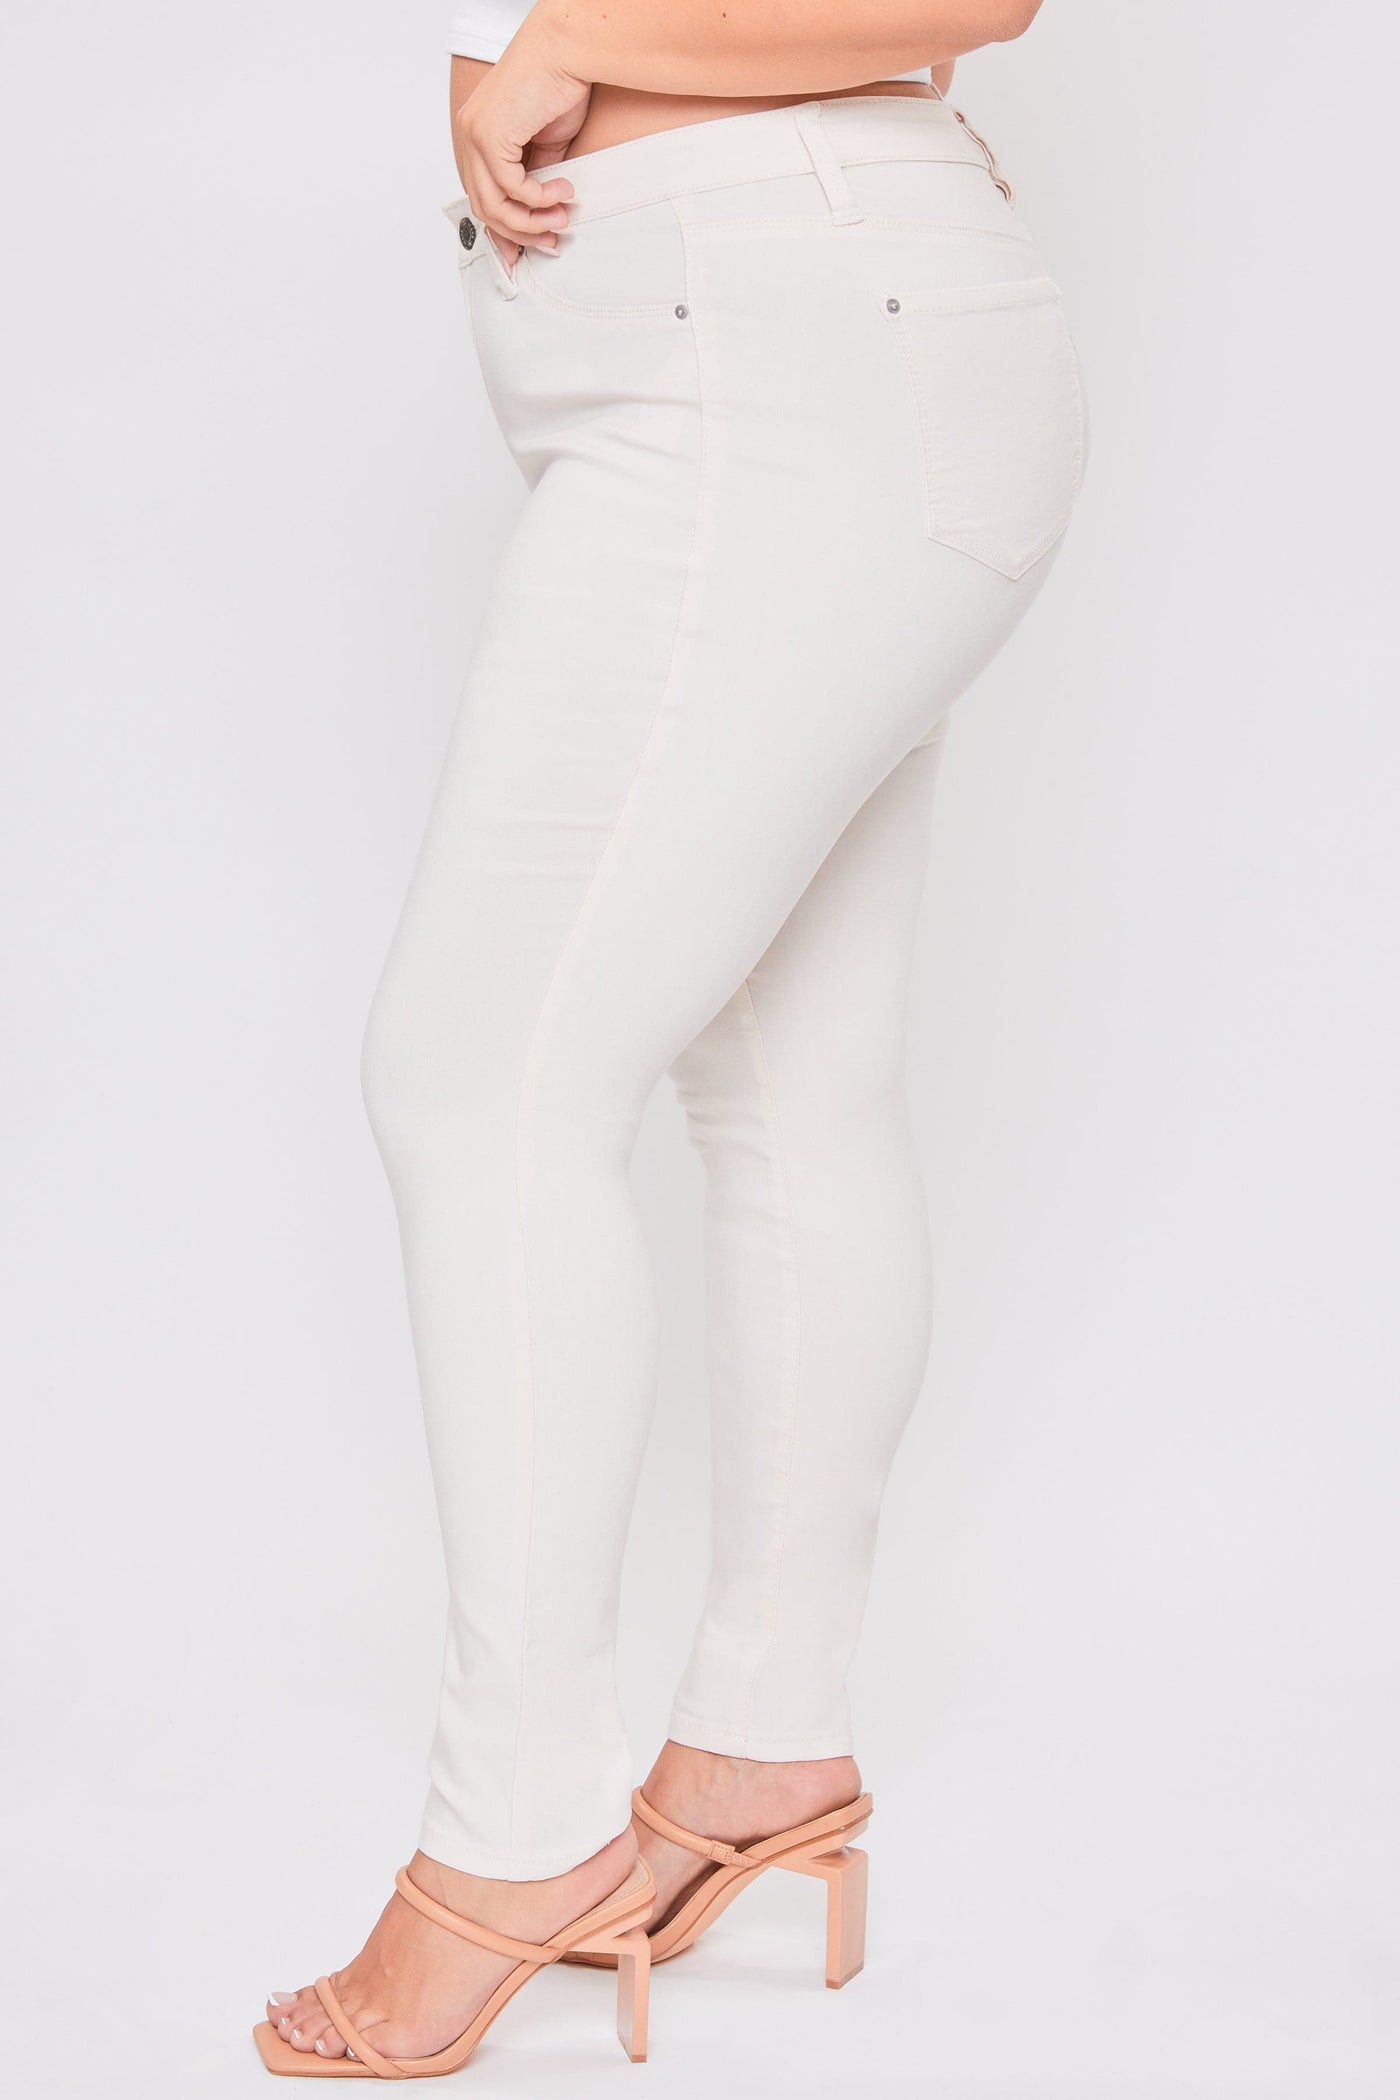 Women's Plus Size Hyperstretch Forever Color Pants - Pastels